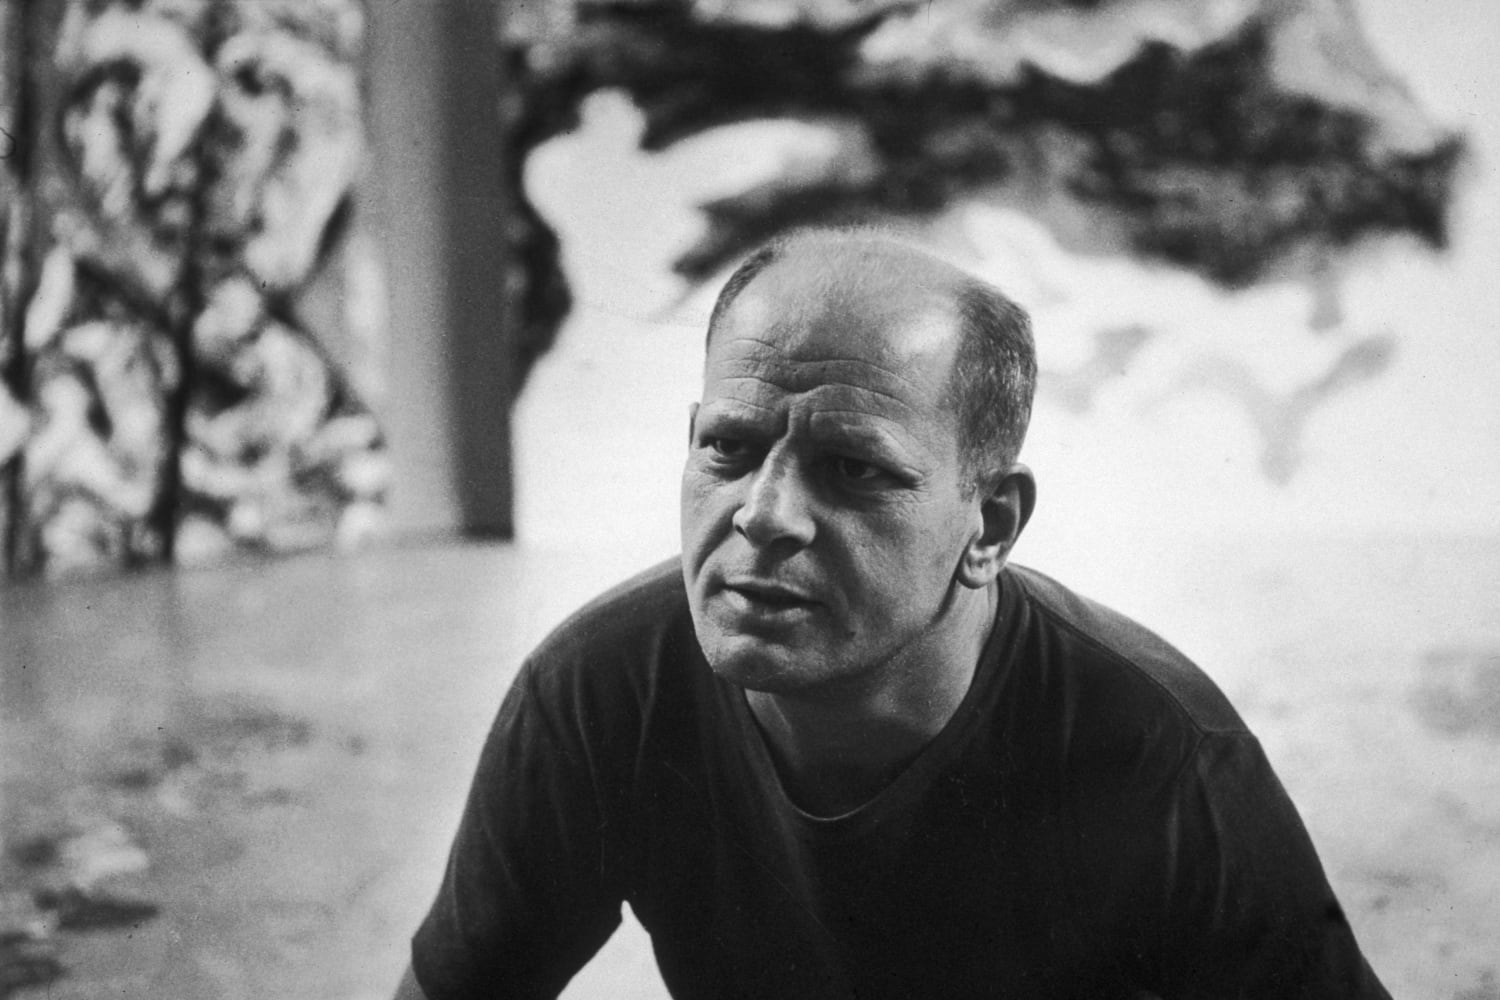 Unknown Jackson Pollock painting found during police raid in Bulgaria